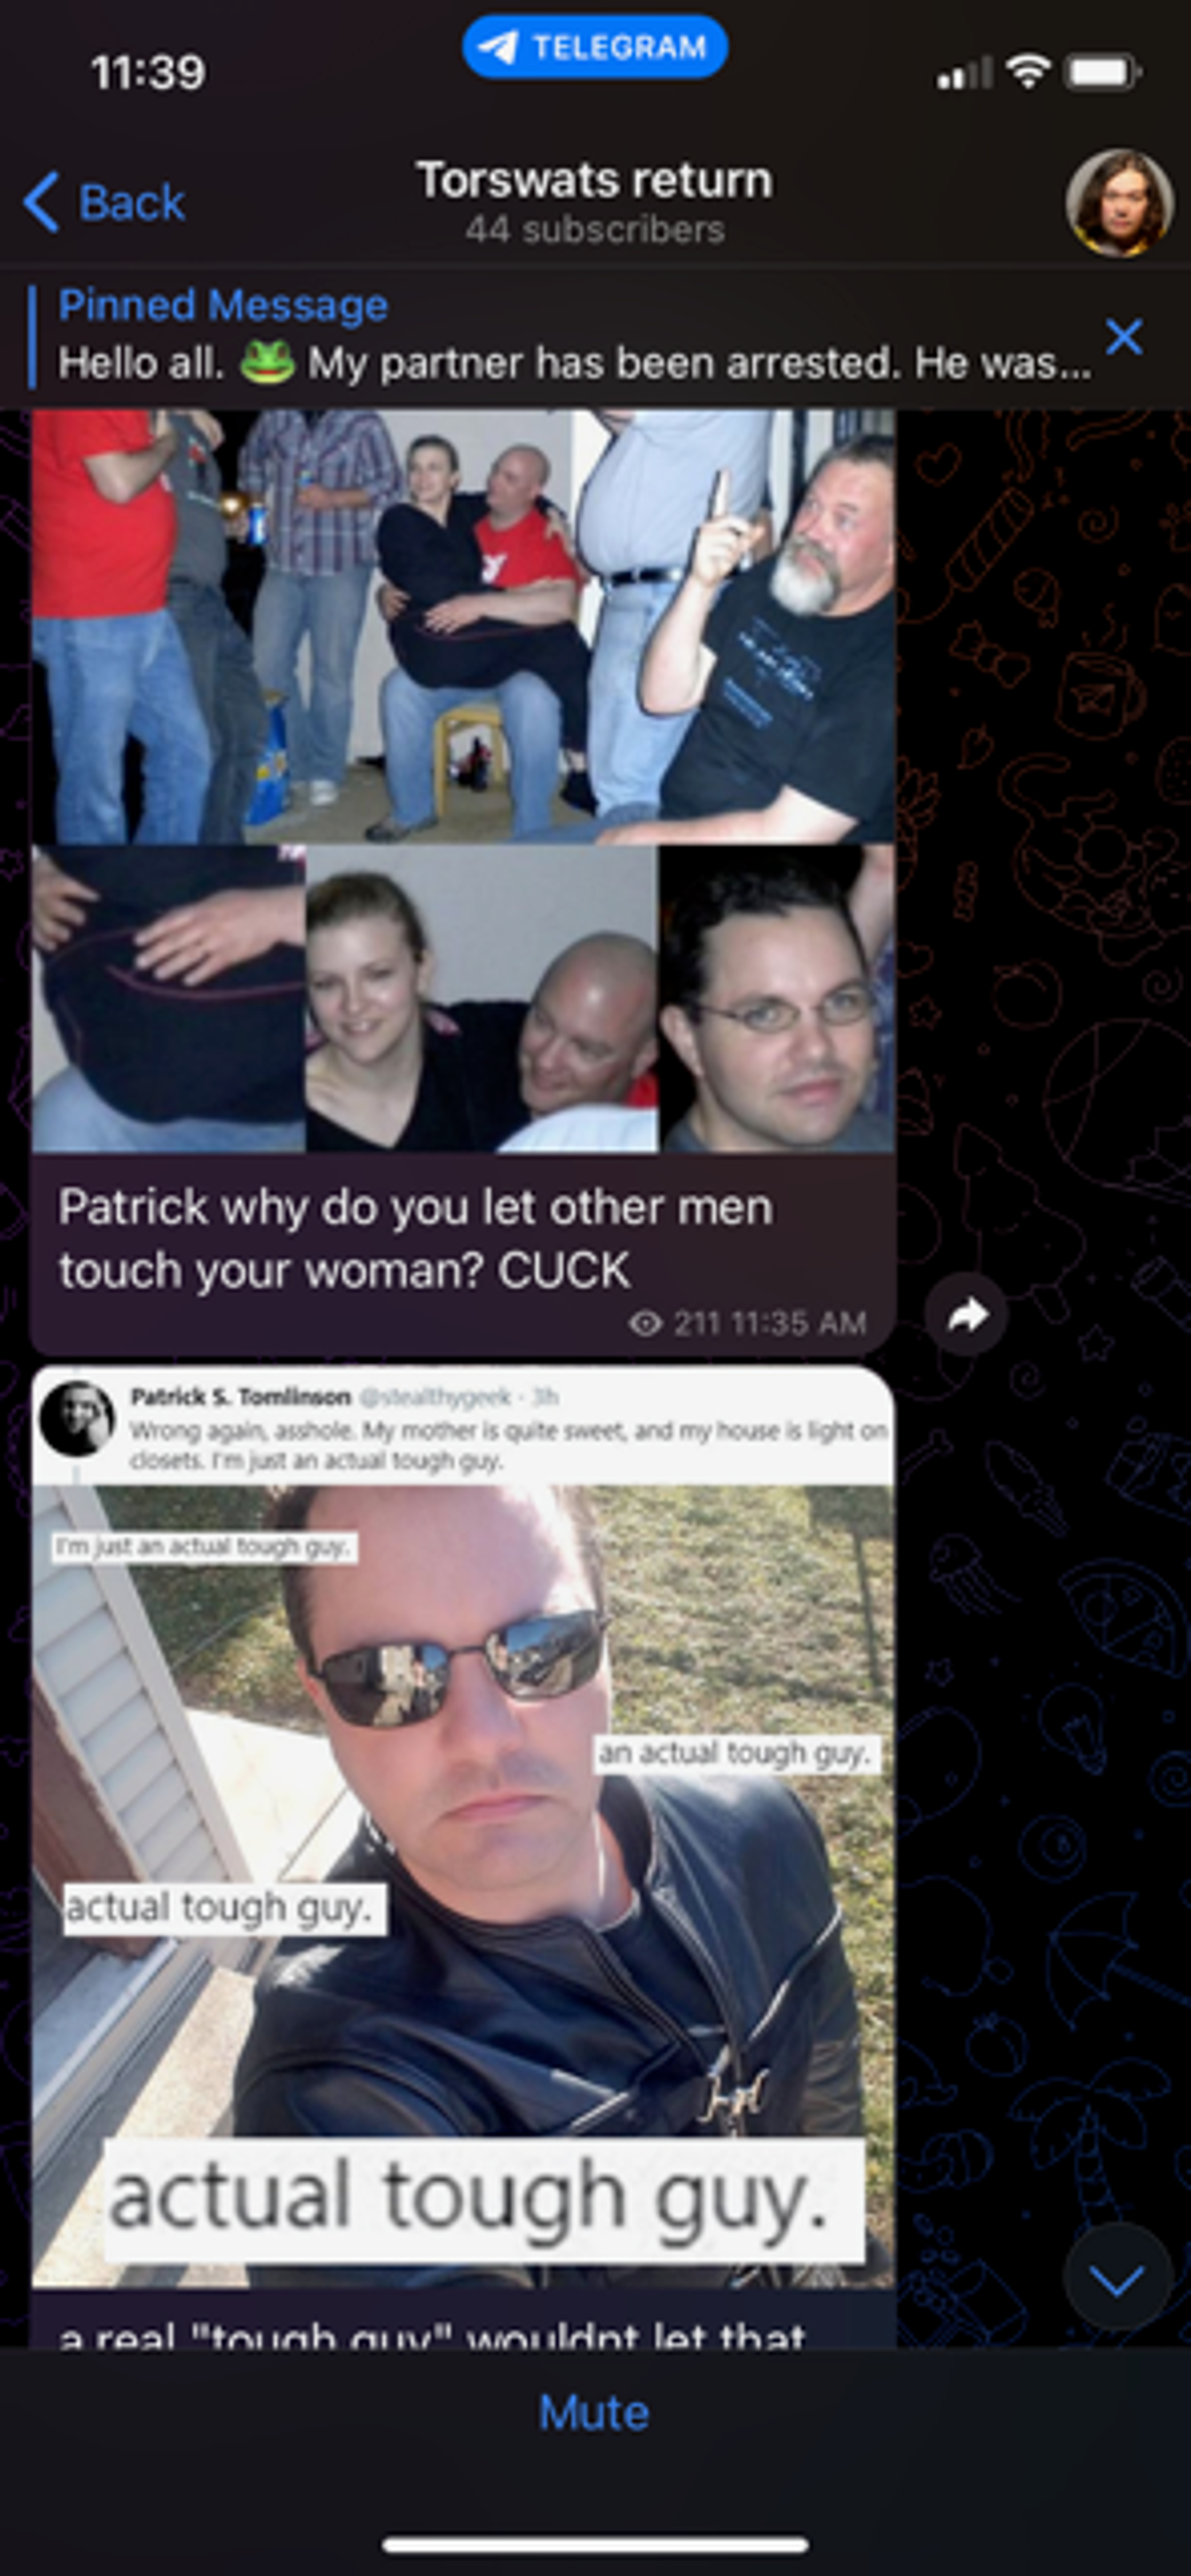 A dedicated ‘swatting’ channel on Telegram has made explicit threats and derogatory posts about author Patrick S. Tomlinson (Screenshot)